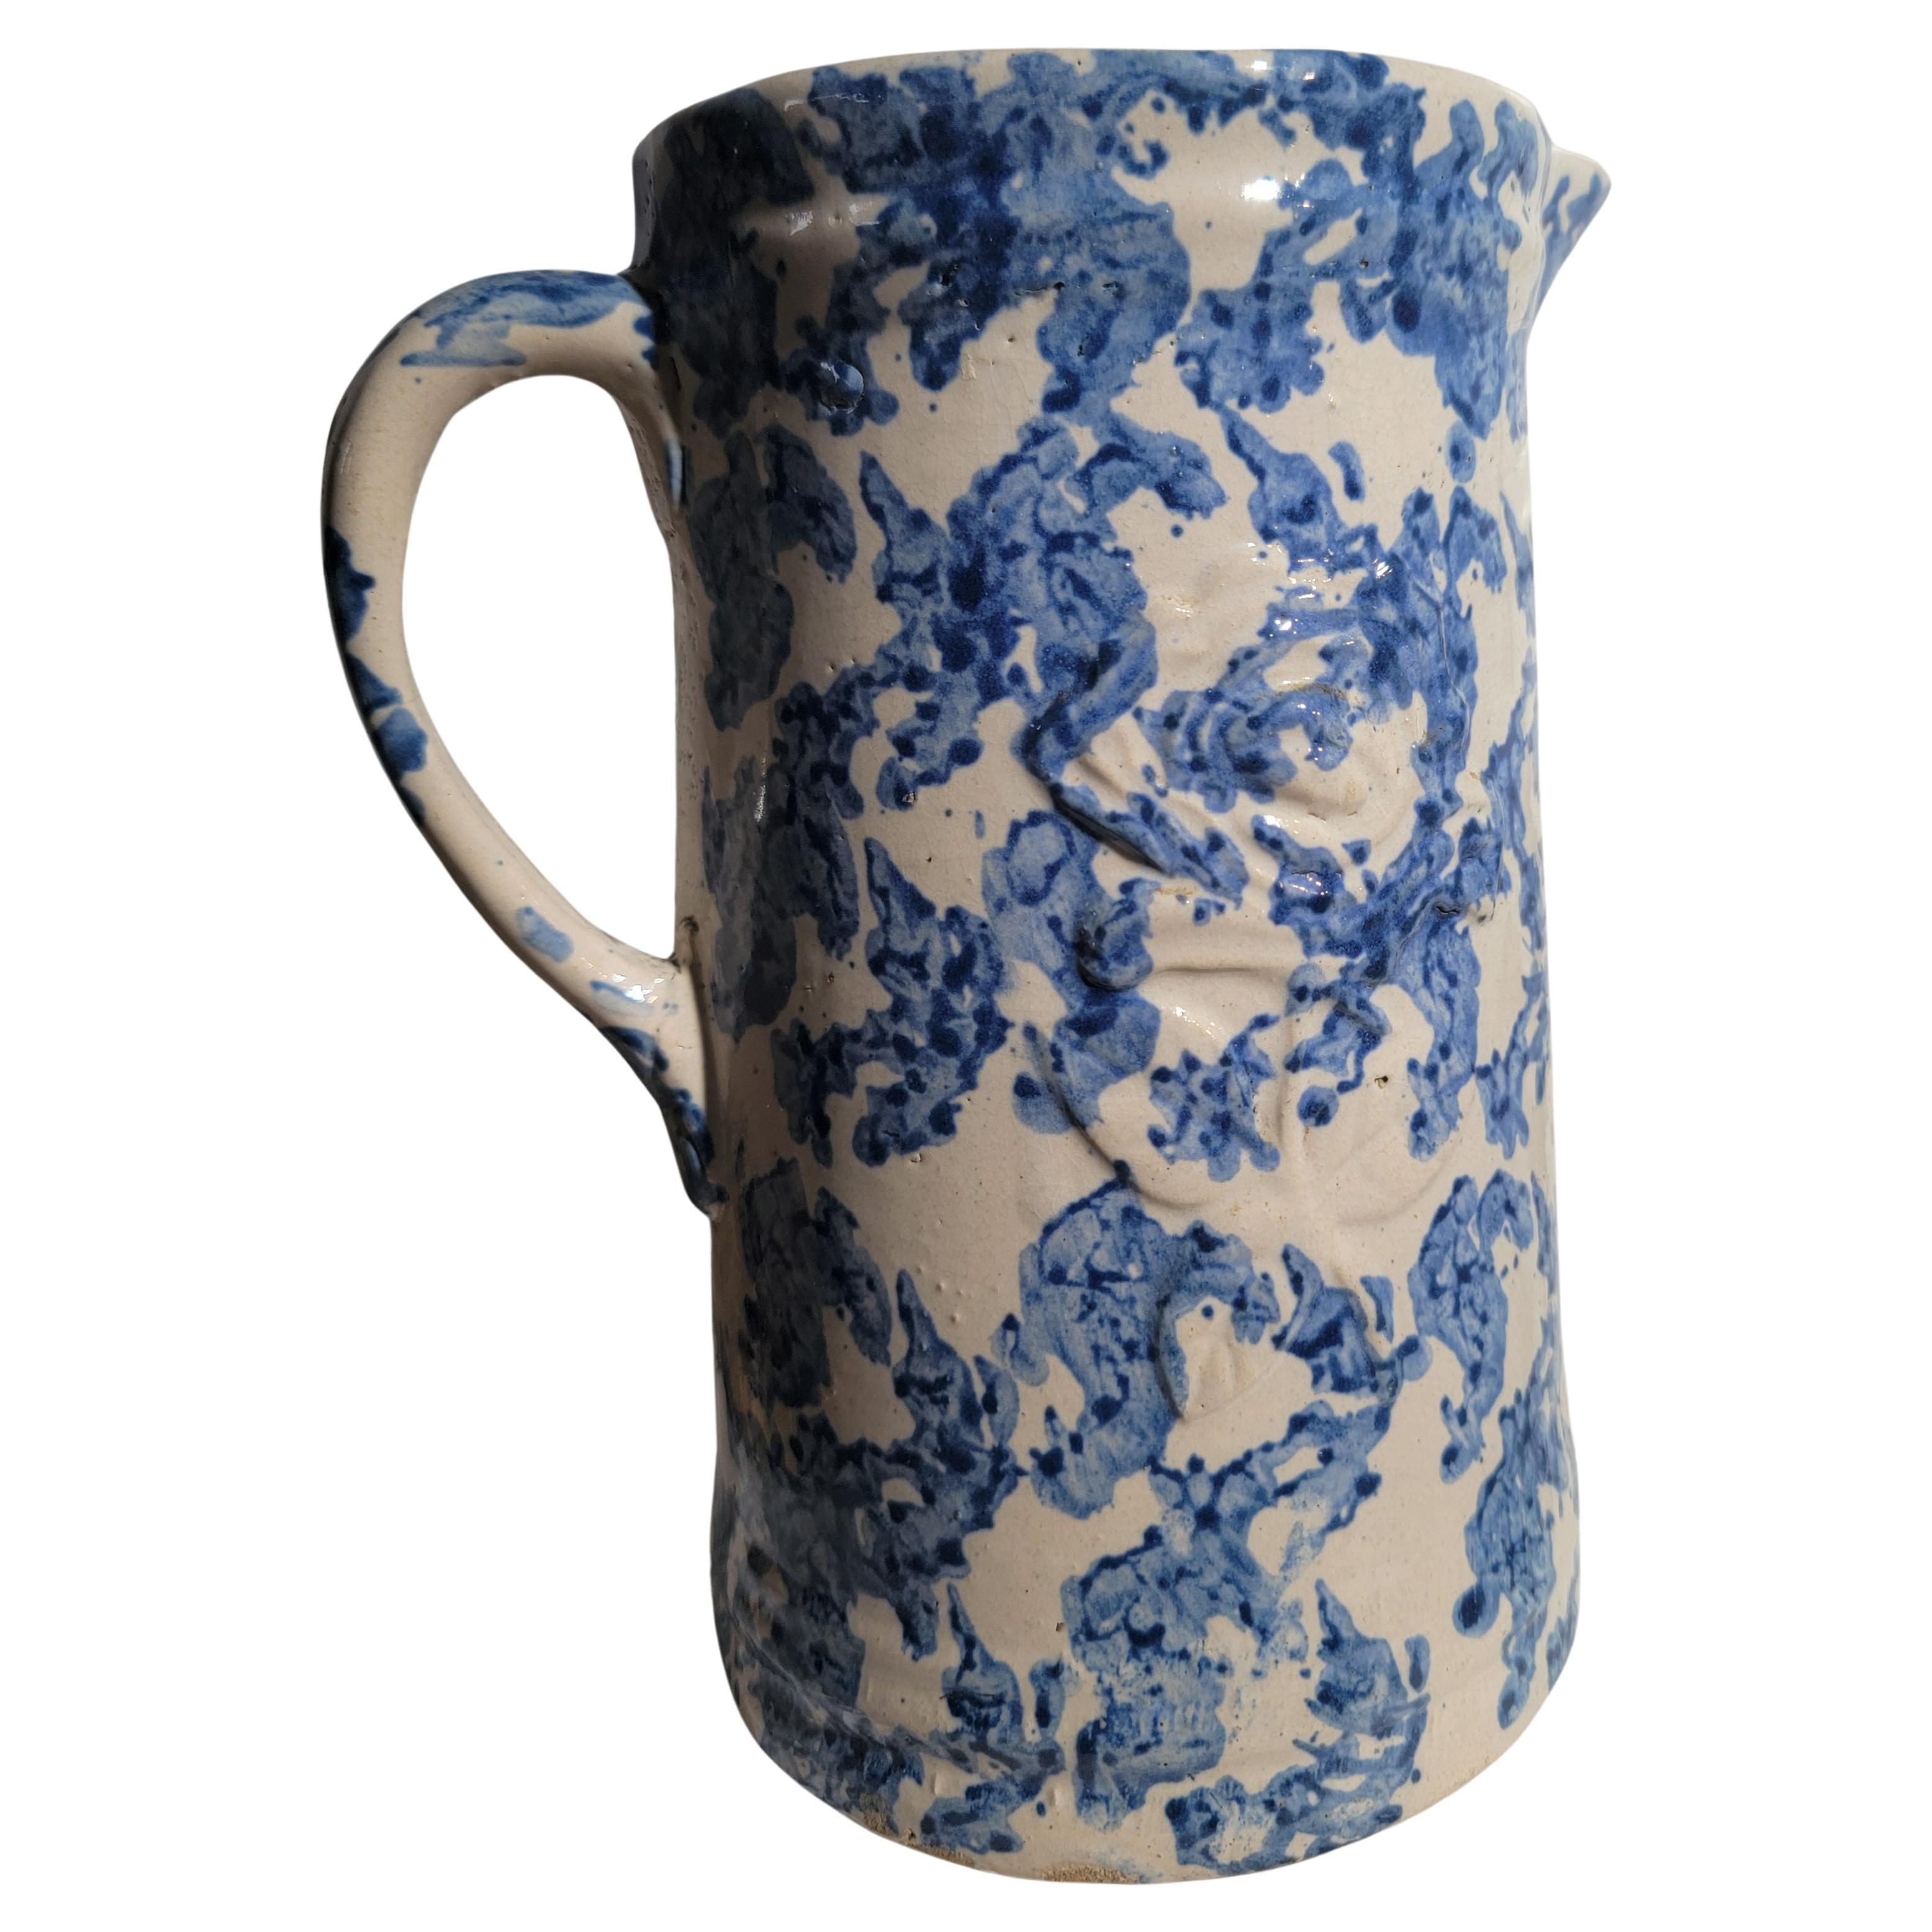 19thc Sponge Ware Smoke Ring Pitcher With Floral Design For Sale